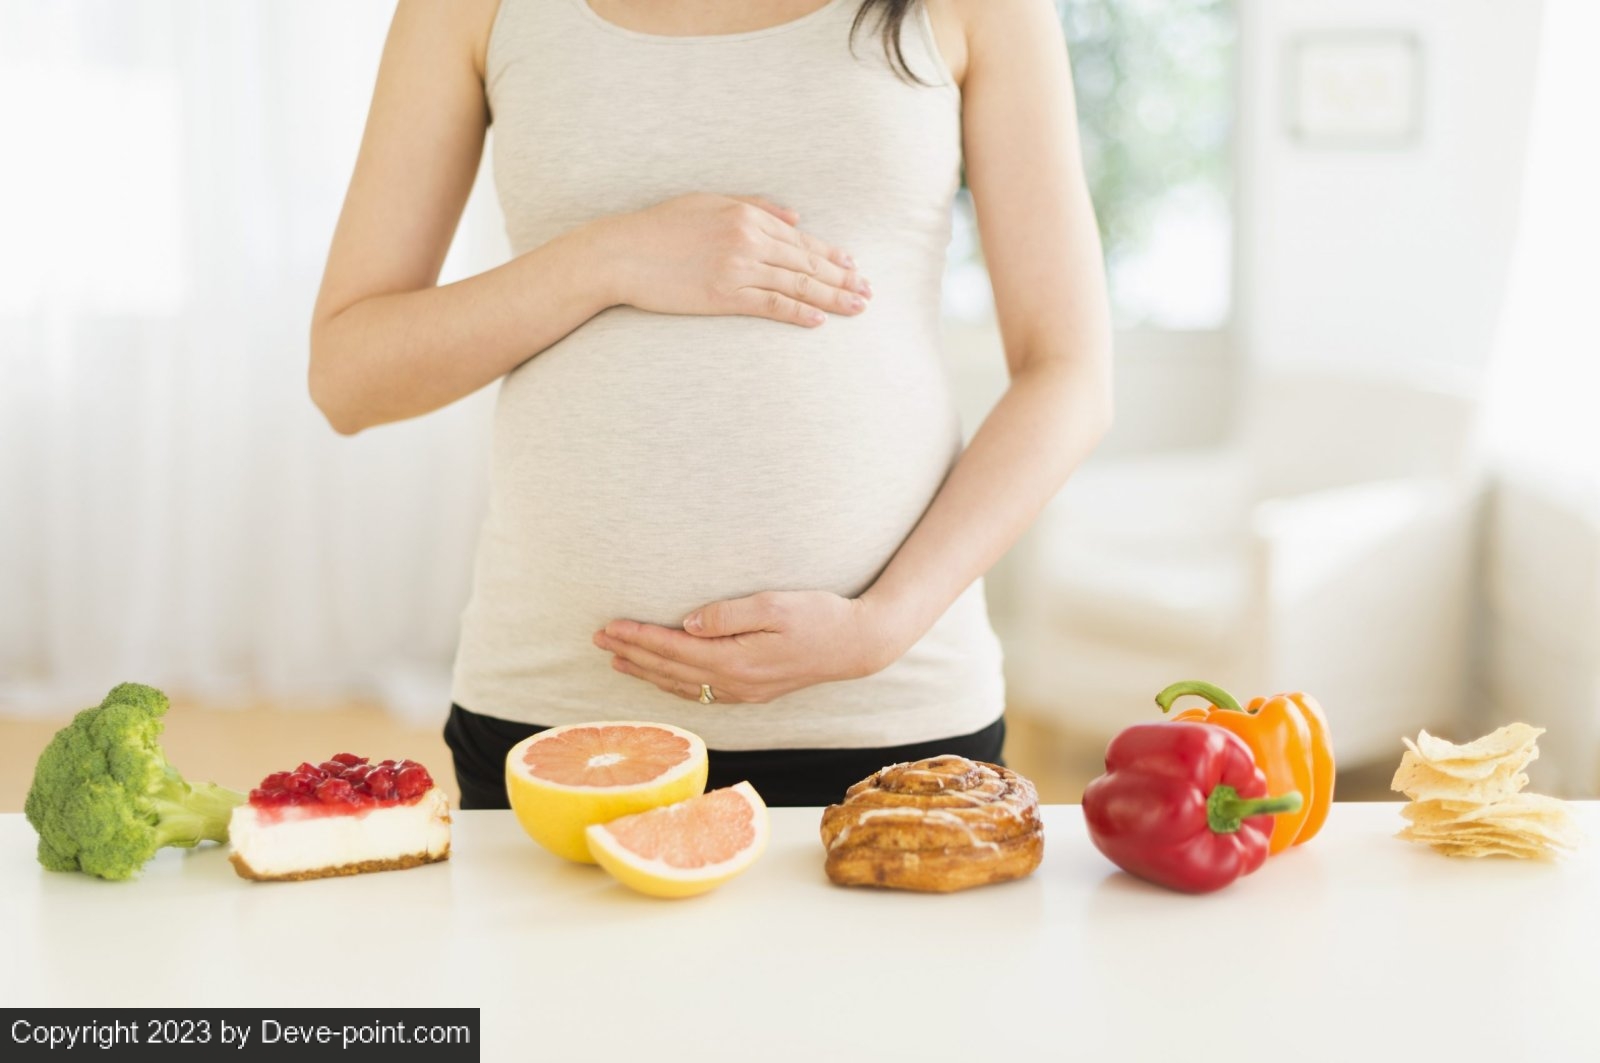 Nutrition during pregnancy scaled